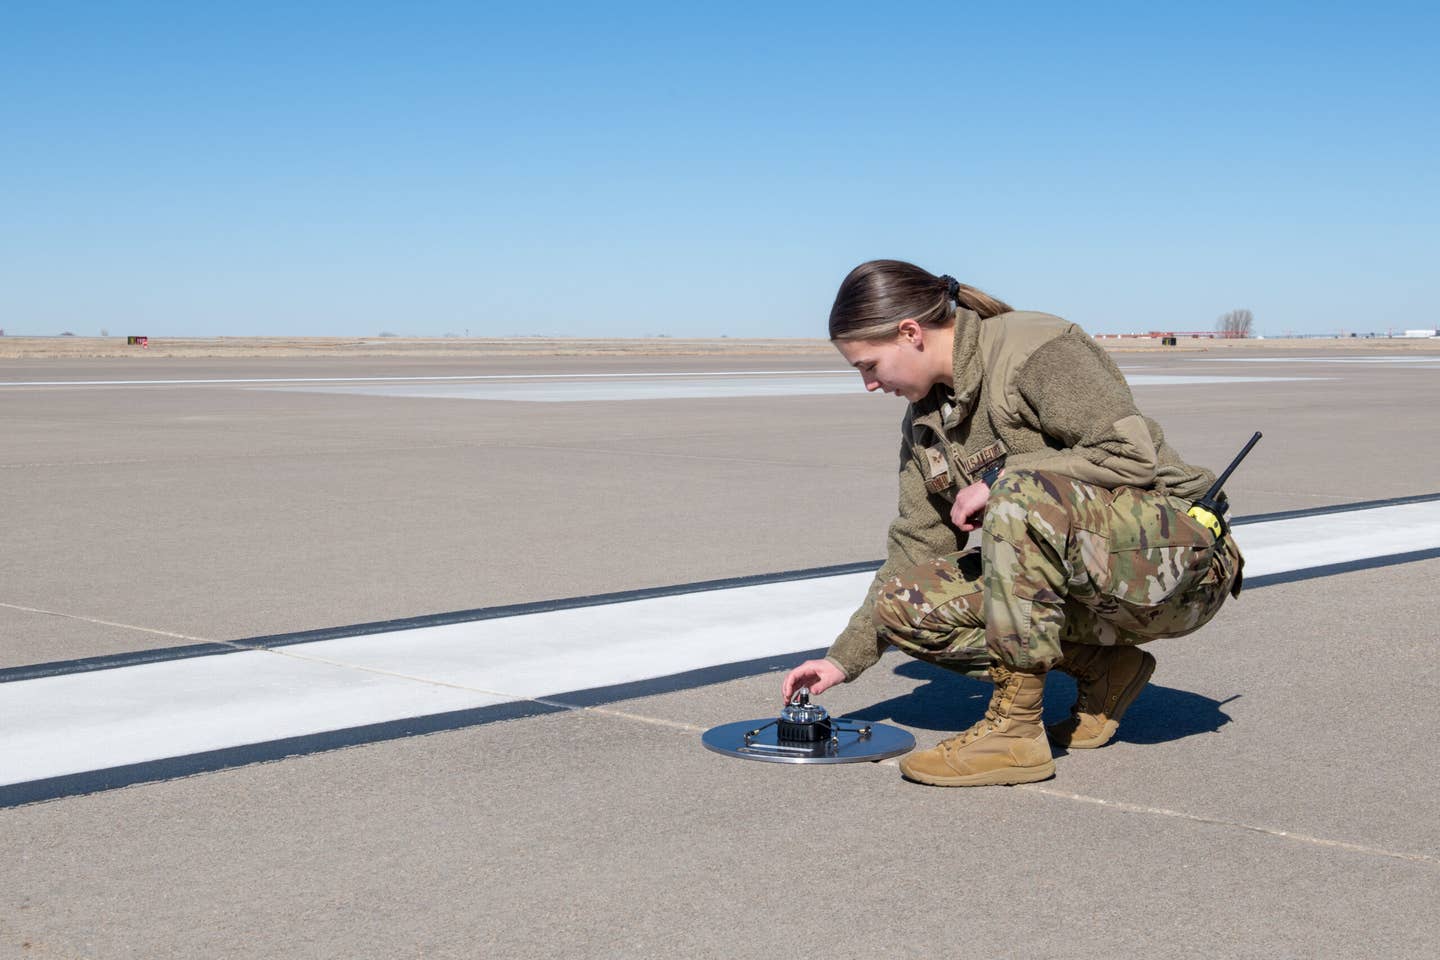 Senior Airman Genavieve Rohling, 22nd Operations Support Squadron, airfield management shift lead, places a Phantom ALZ-15 portable landing zone light on the runway in preparation for AMP-3 system training. <em>Credit: U.S. Air Force photo by Staff Sgt. Adam Goodly</em>